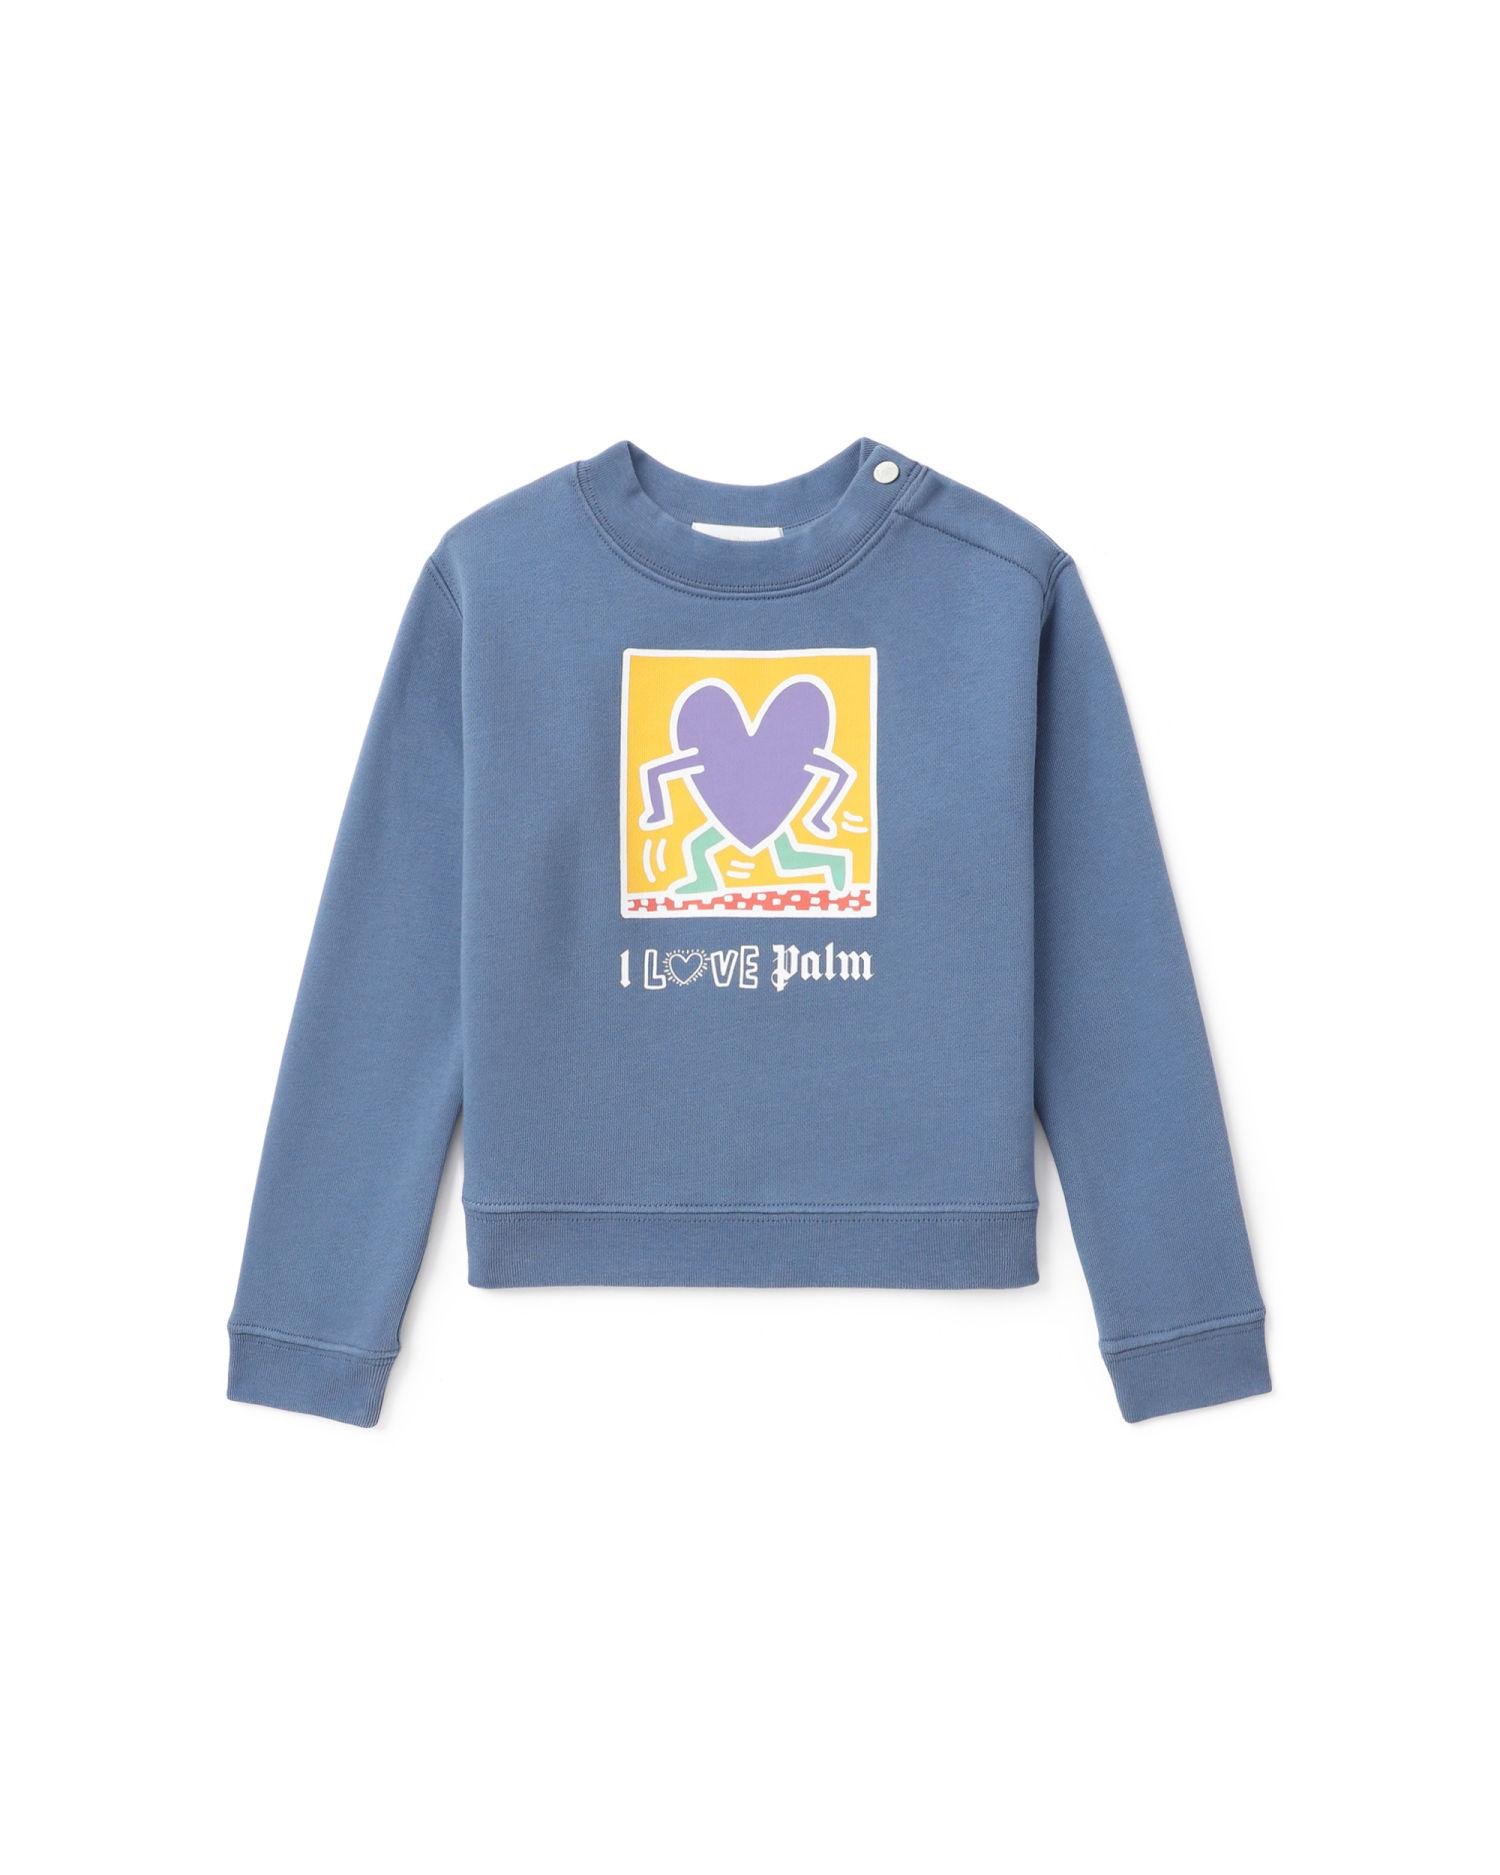 Kids graphic front sweatshirt by PALM ANGELS